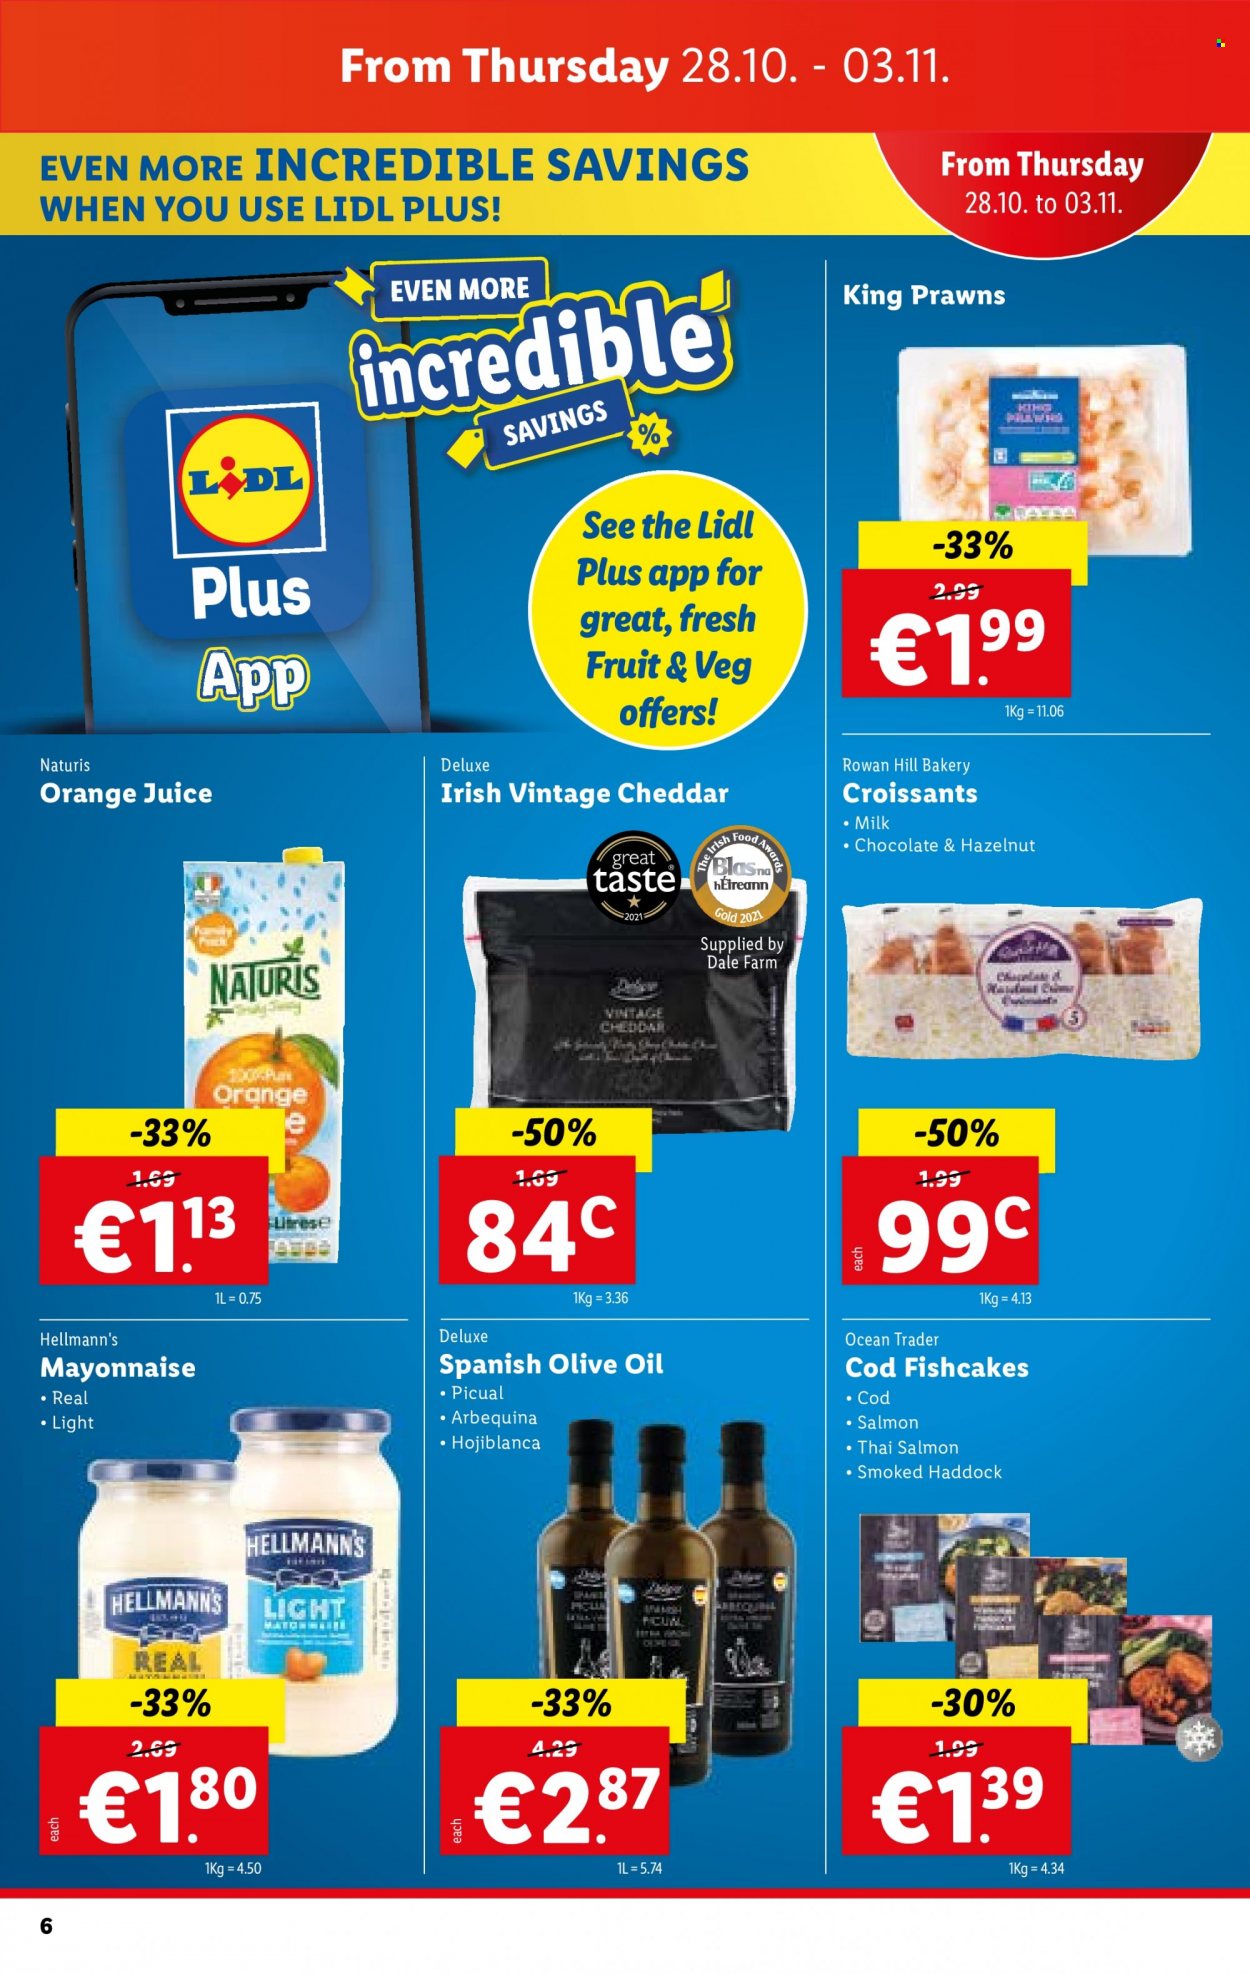 thumbnail - Lidl offer  - 28.10.2021 - 03.11.2021 - Sales products - croissant, cod, salmon, haddock, prawns, cheddar, cheese, milk, mayonnaise, Hellmann’s, fish cake, chocolate, olive oil, oil, orange juice, juice. Page 6.